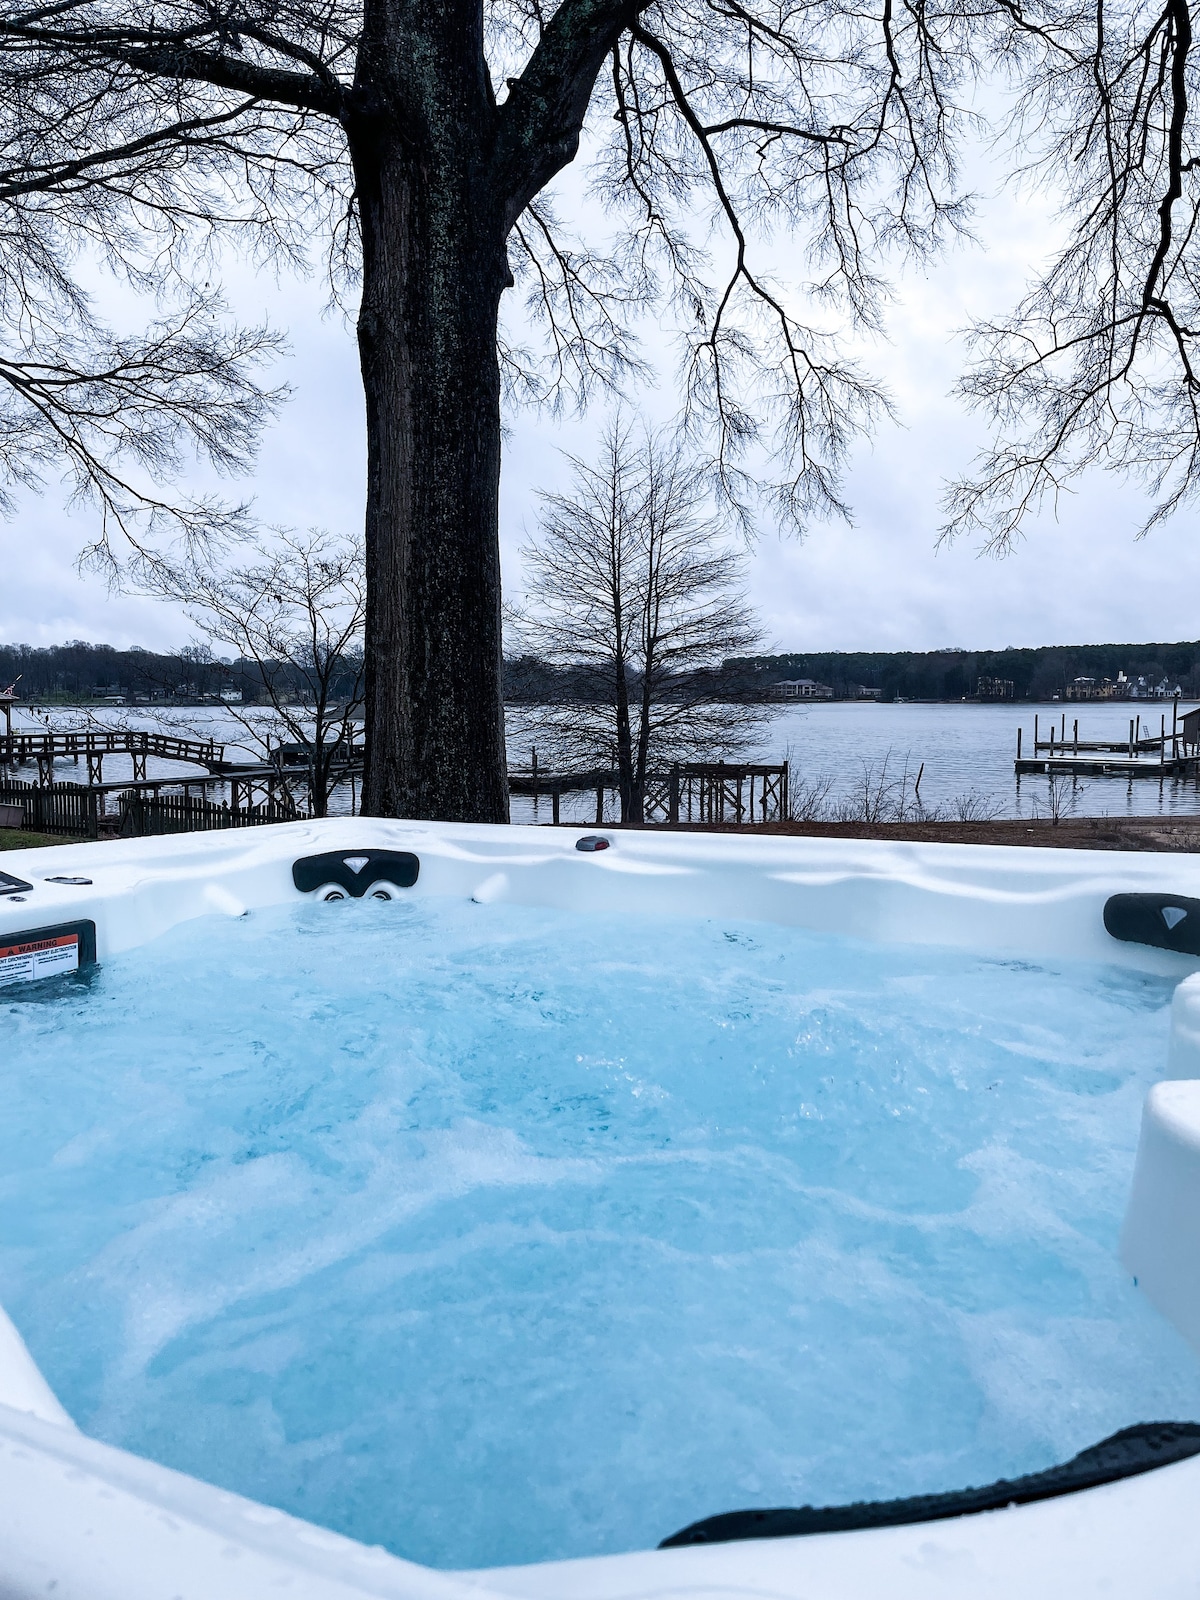 Shore to Please! Hot Tub+Kayaks+Fire Pit+Gameroom